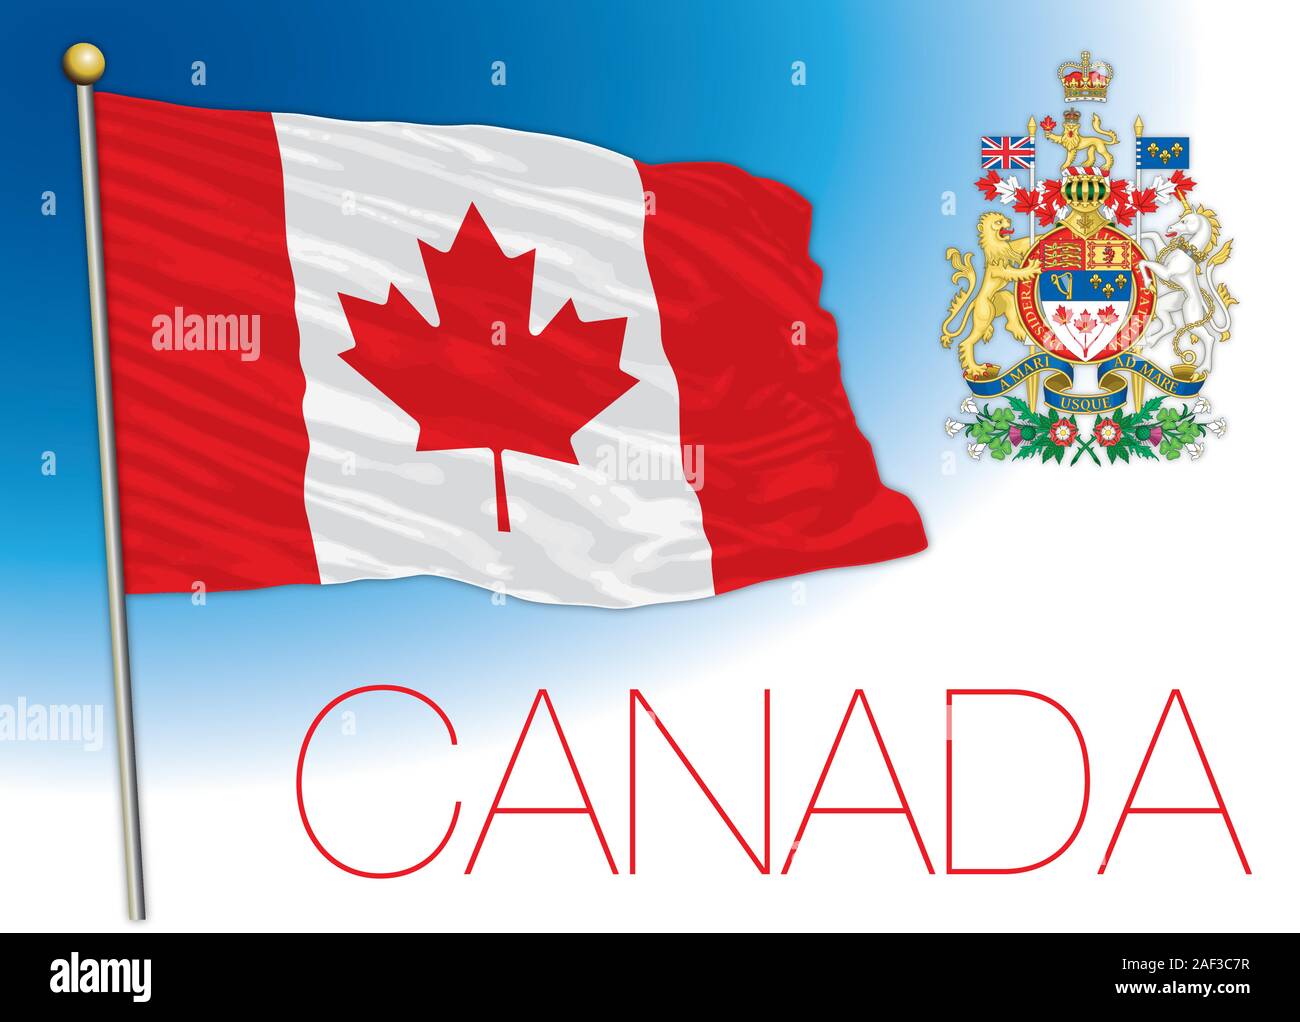 Canada official national flag and coat of arms, north america, vector illustration Stock Vector